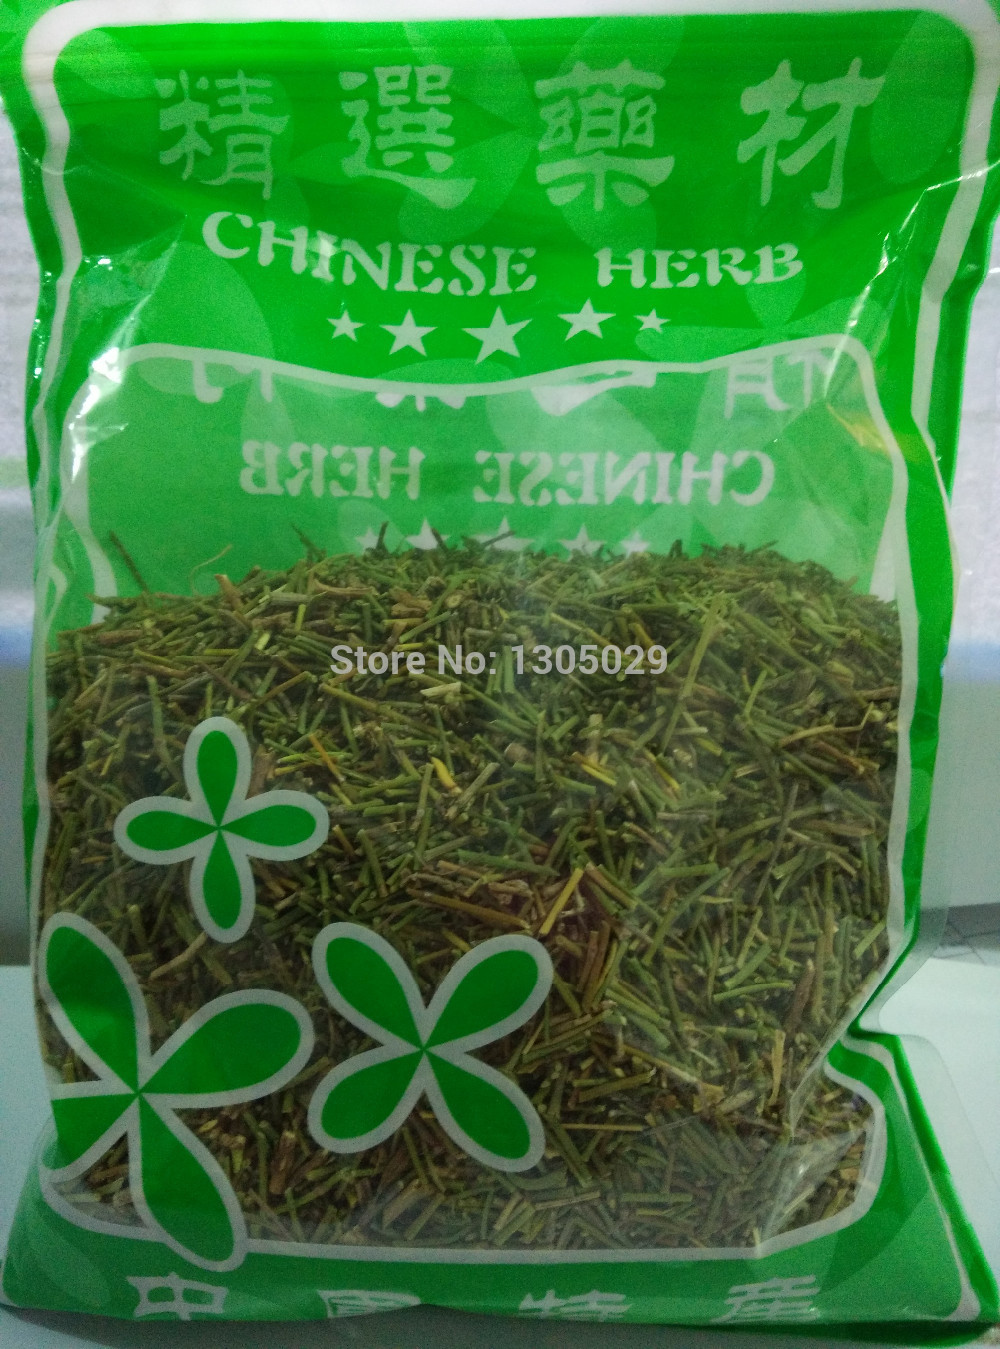 Promotion-500g-Wild-Ma-Huang-Ephedra-Sinica-Natural-Herbal-Tea-Anti-Cough-Fating-Aging-China-Health